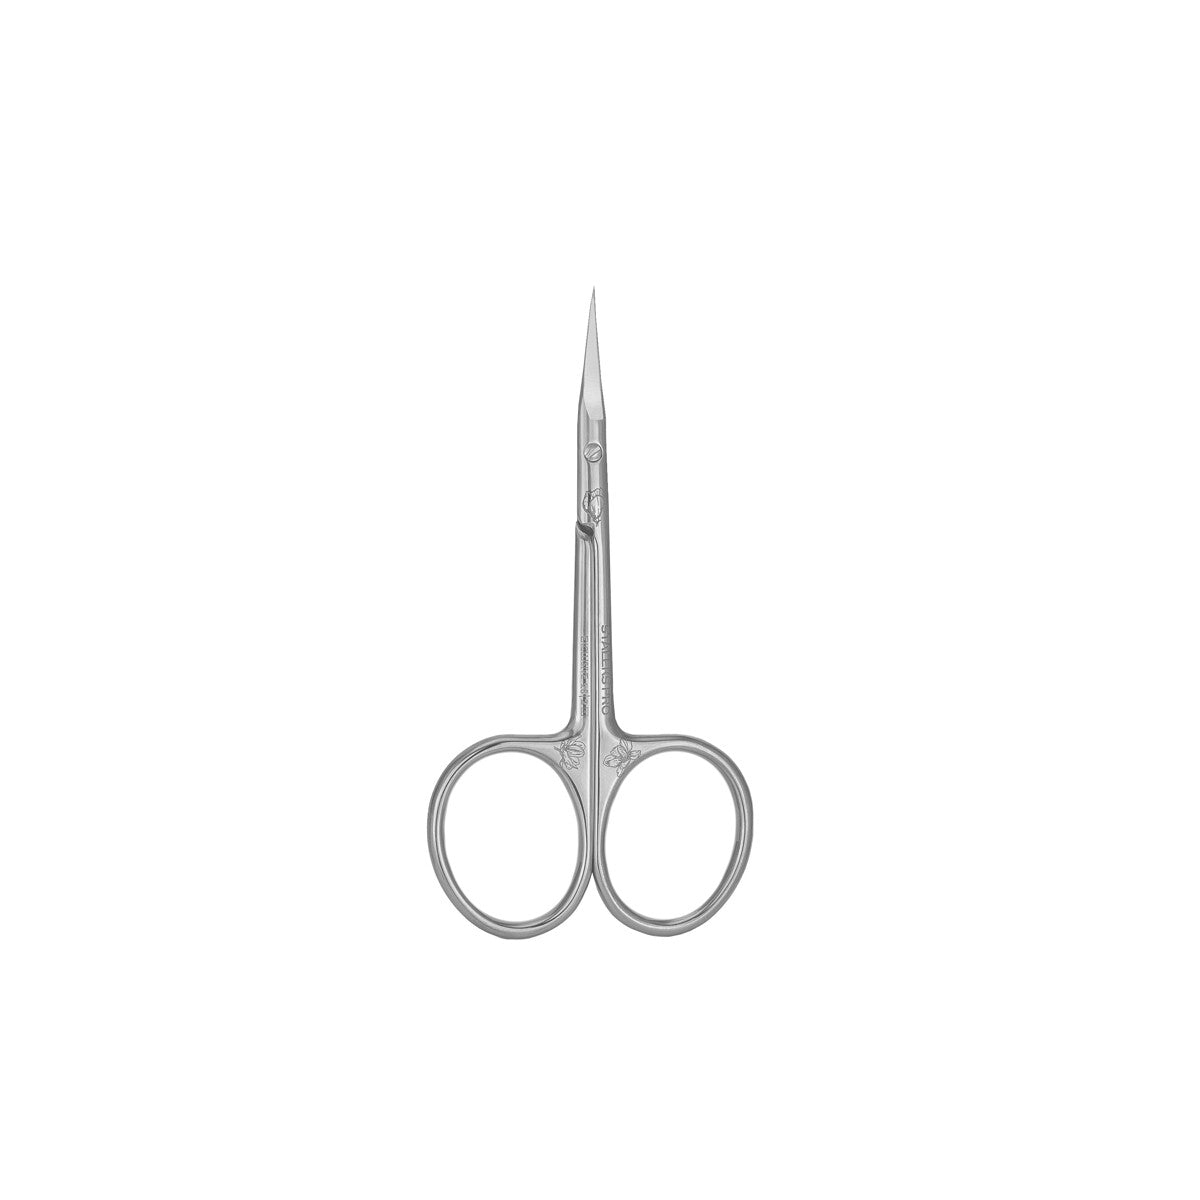 Staleks_Professional_cuticle_scissors_Exc.23_TYPE_2_Magnol_SX-23_2M_5 product view front